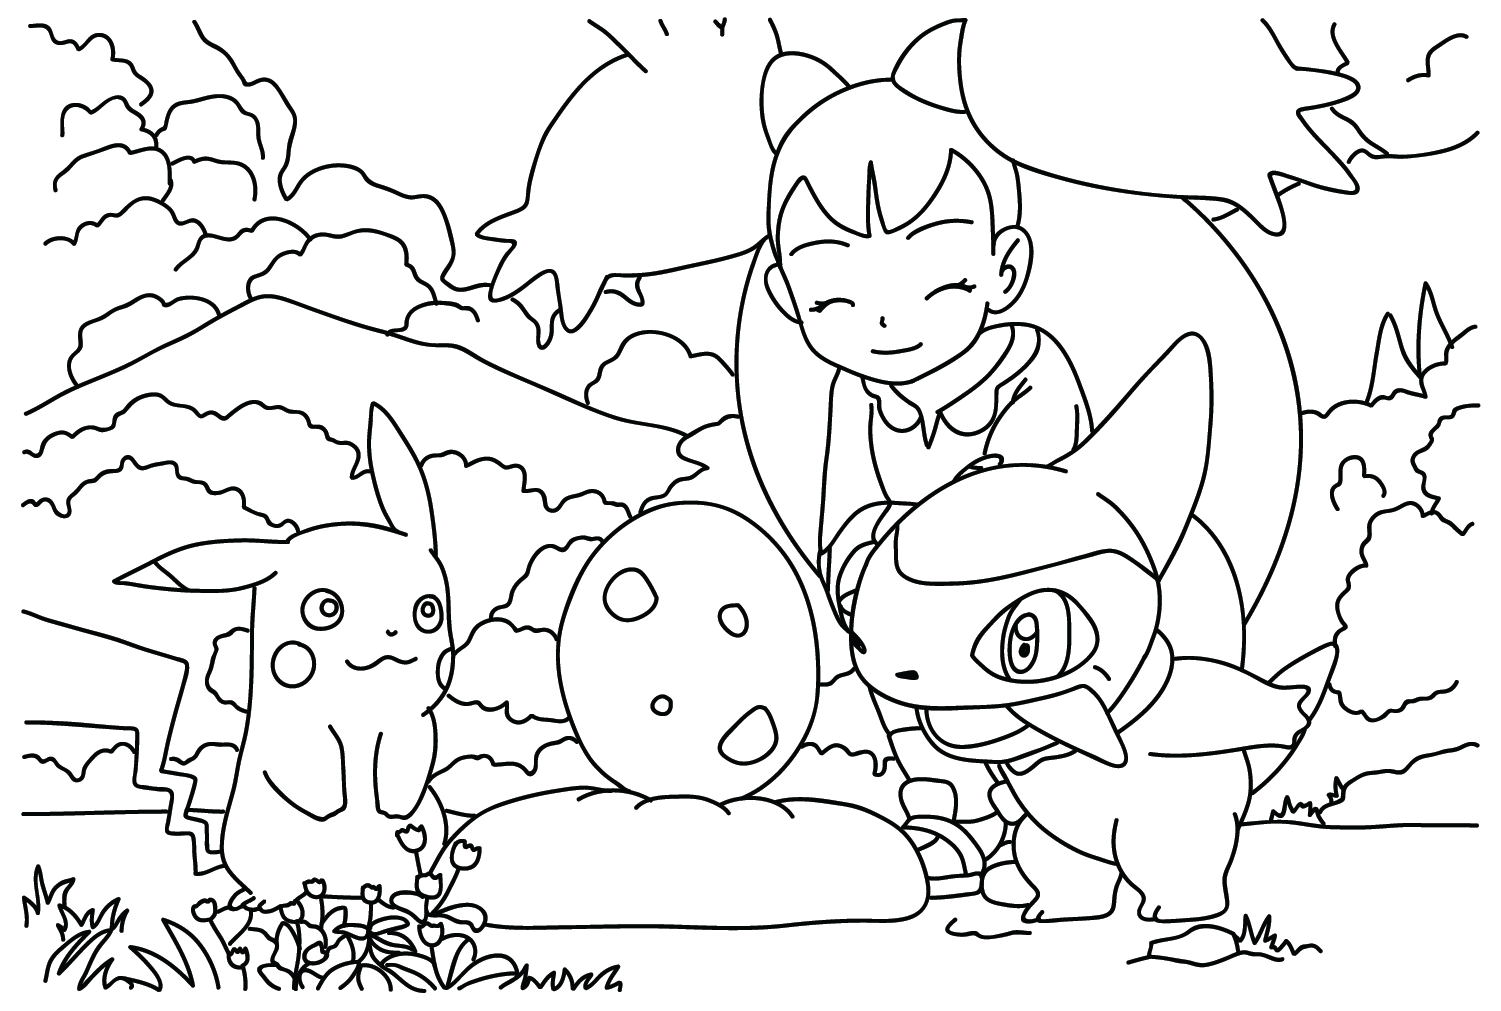 Iris Pokemon Coloring Pages to for Kids from Iris Pokemon